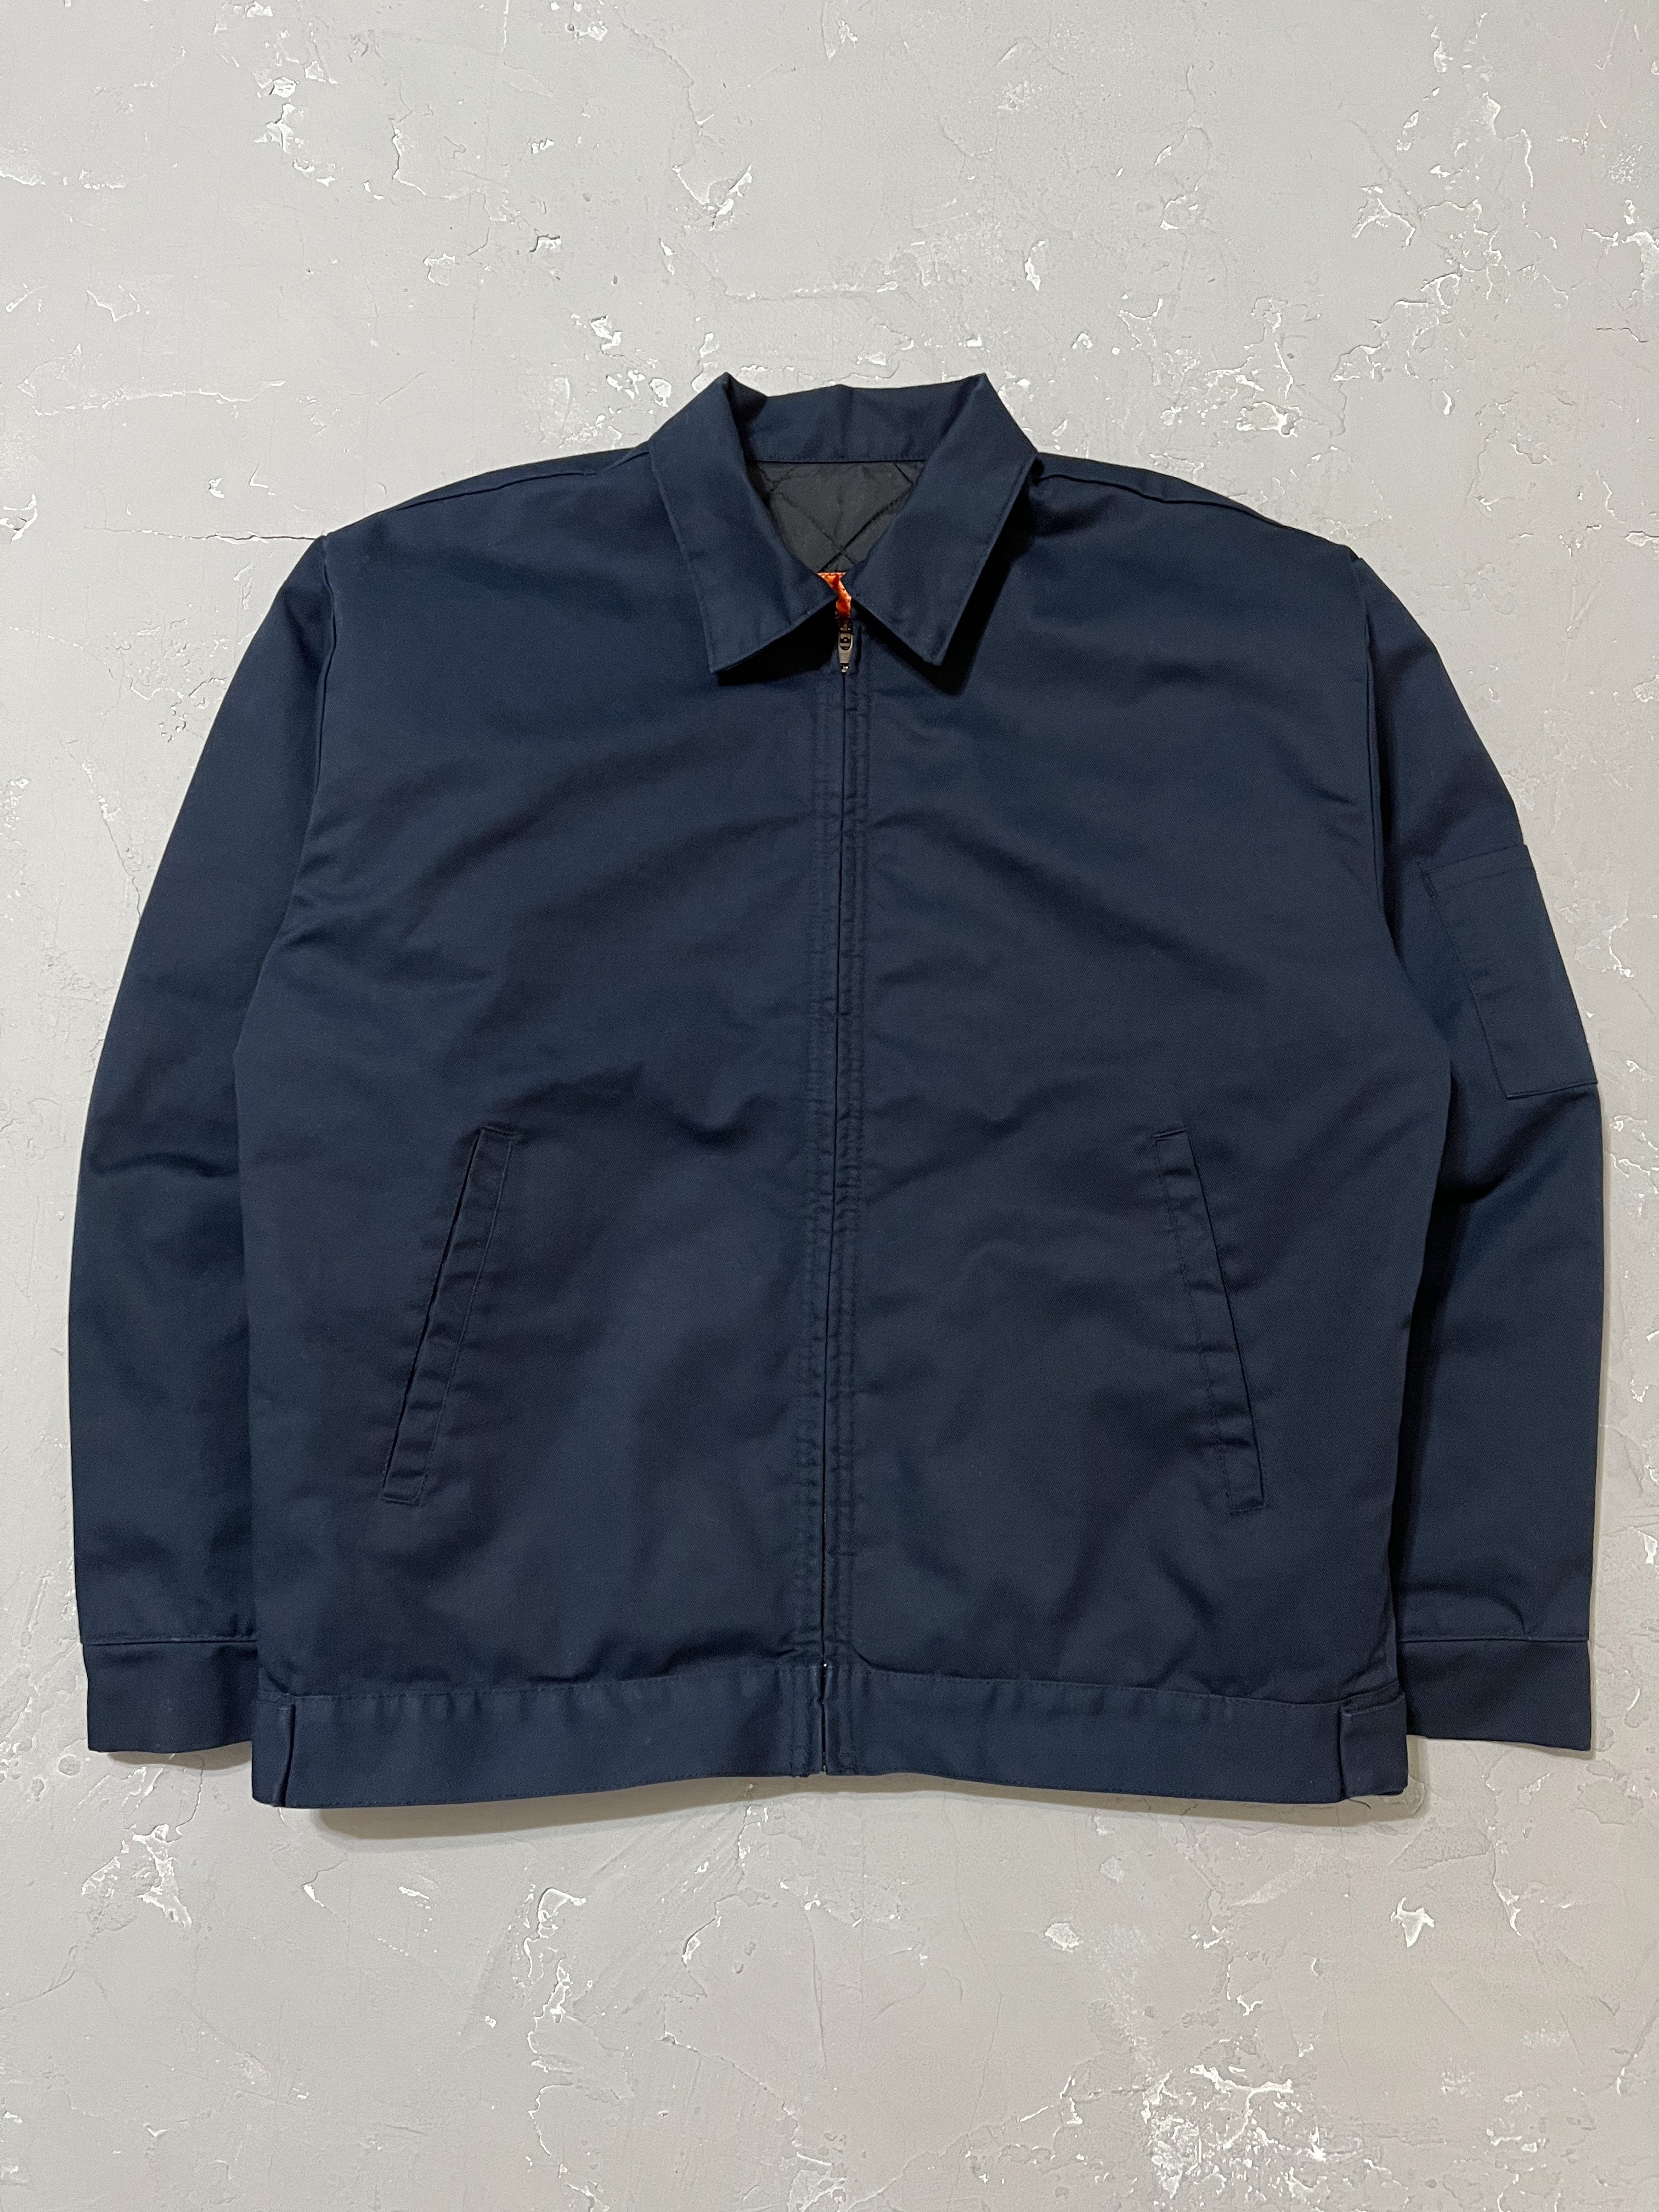 Navy Lined Work Jacket [M/L]